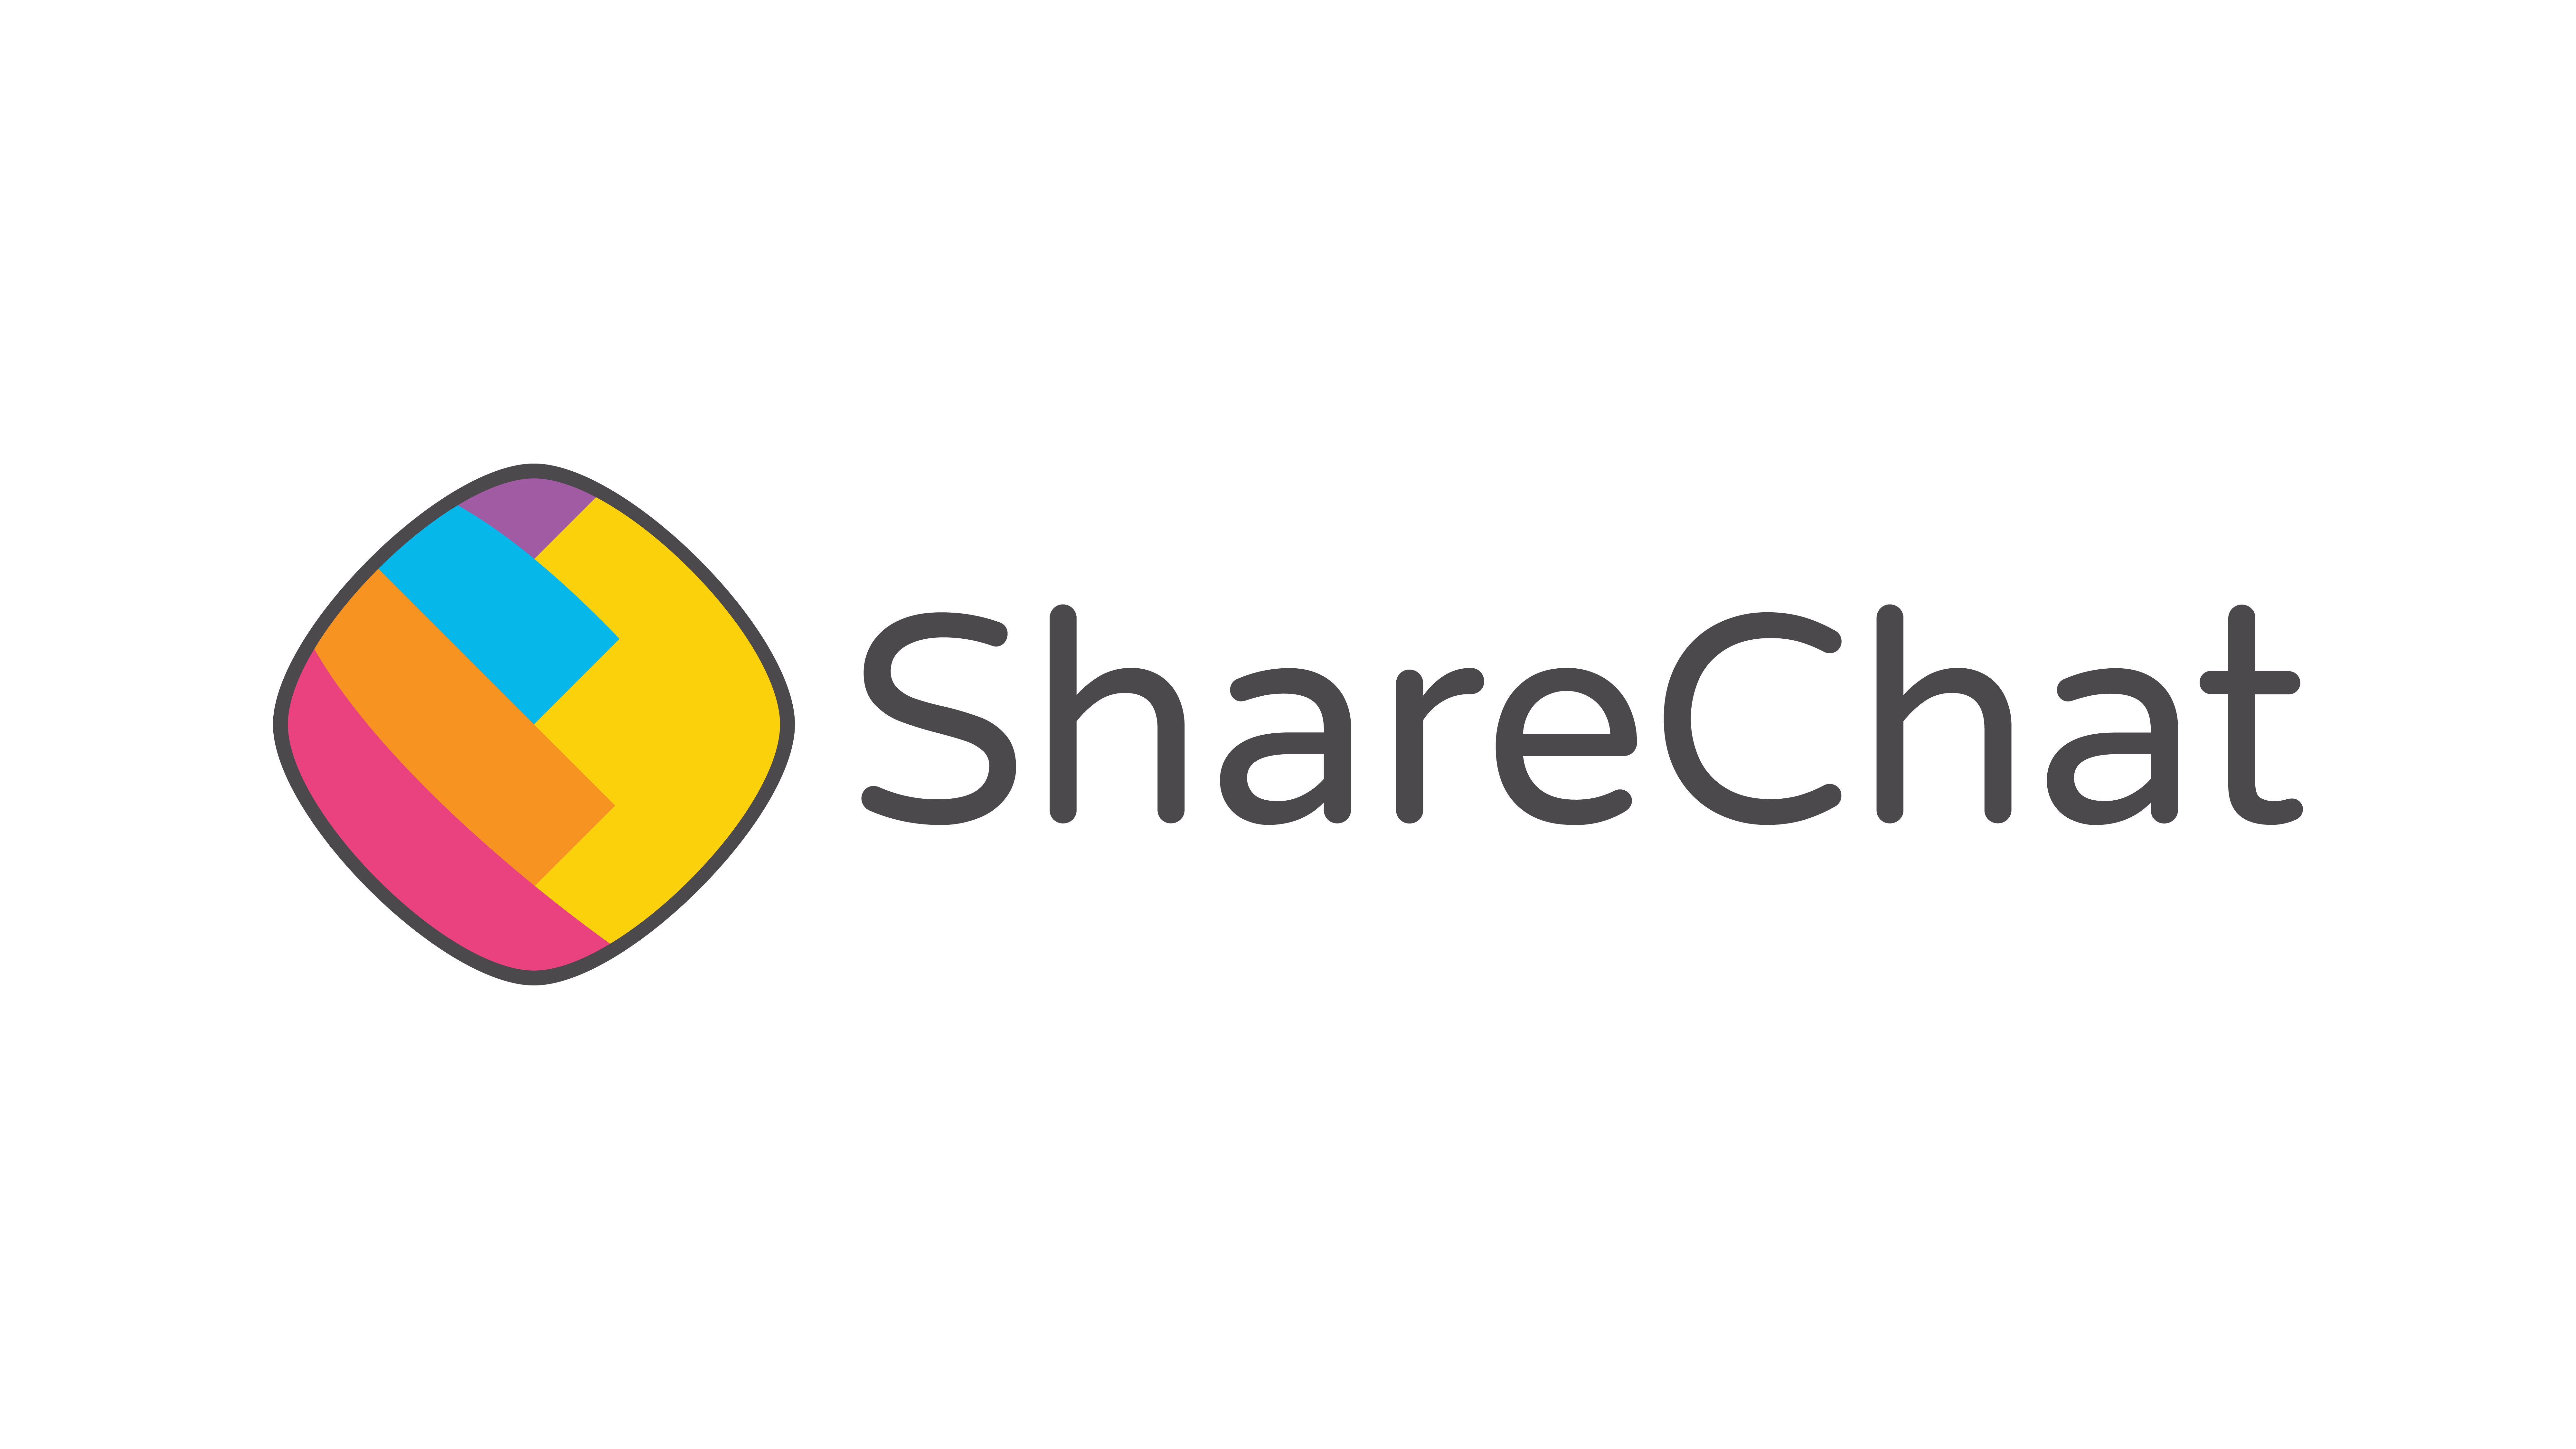 Sharechat News: Latest Sharechat News and Updates at News18